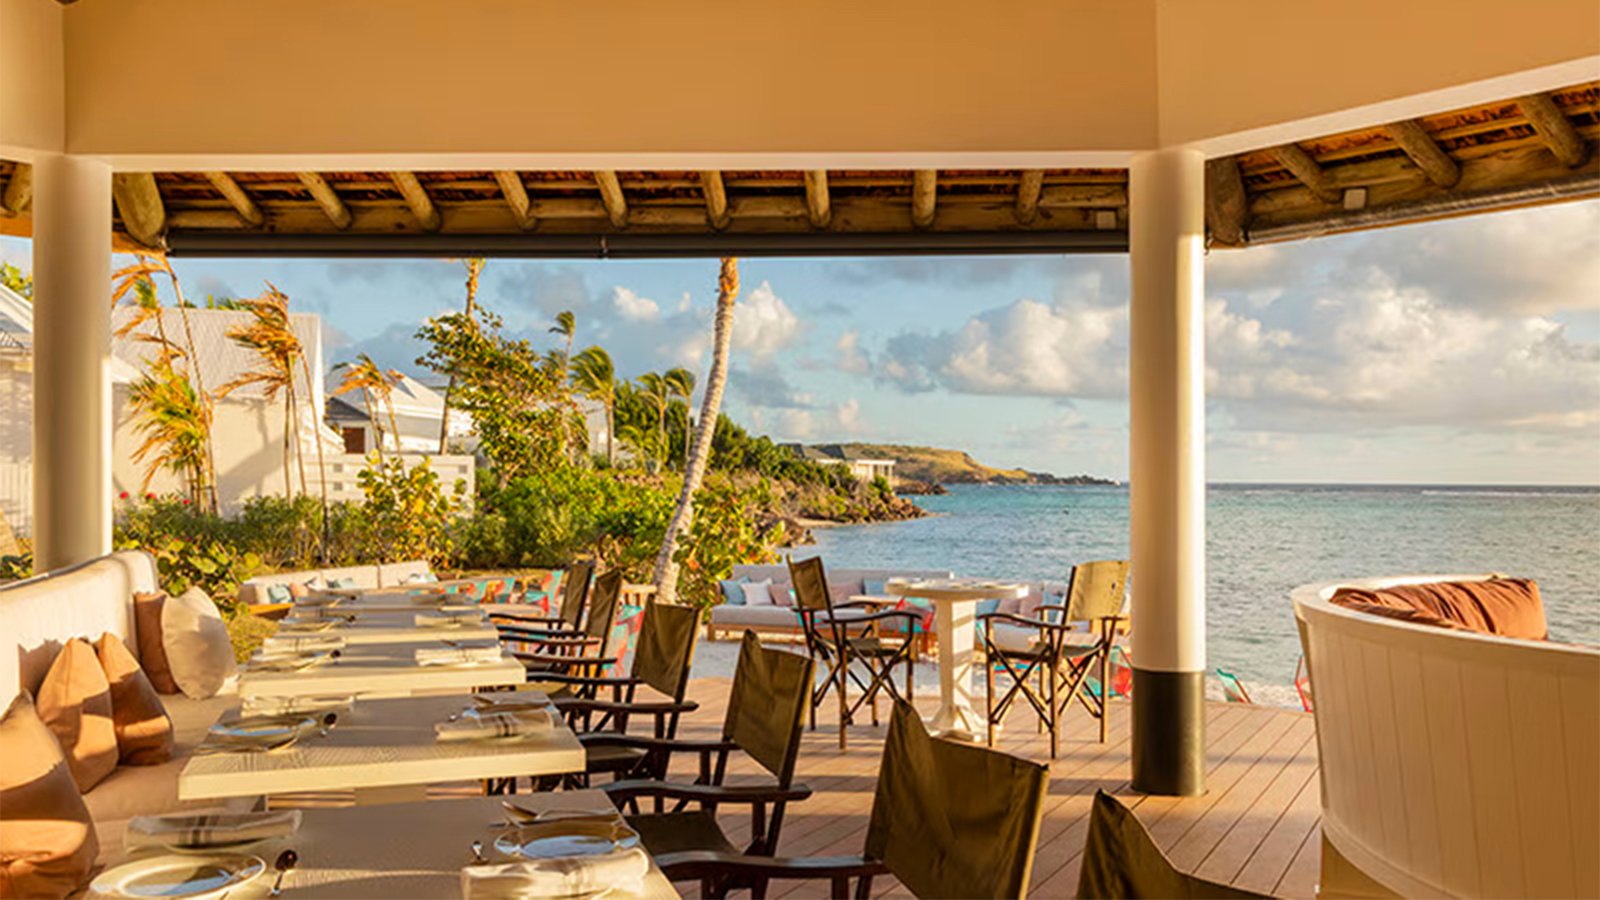 Le Sereno St. Barth's to Reopen For 2022-23 Season On October 27